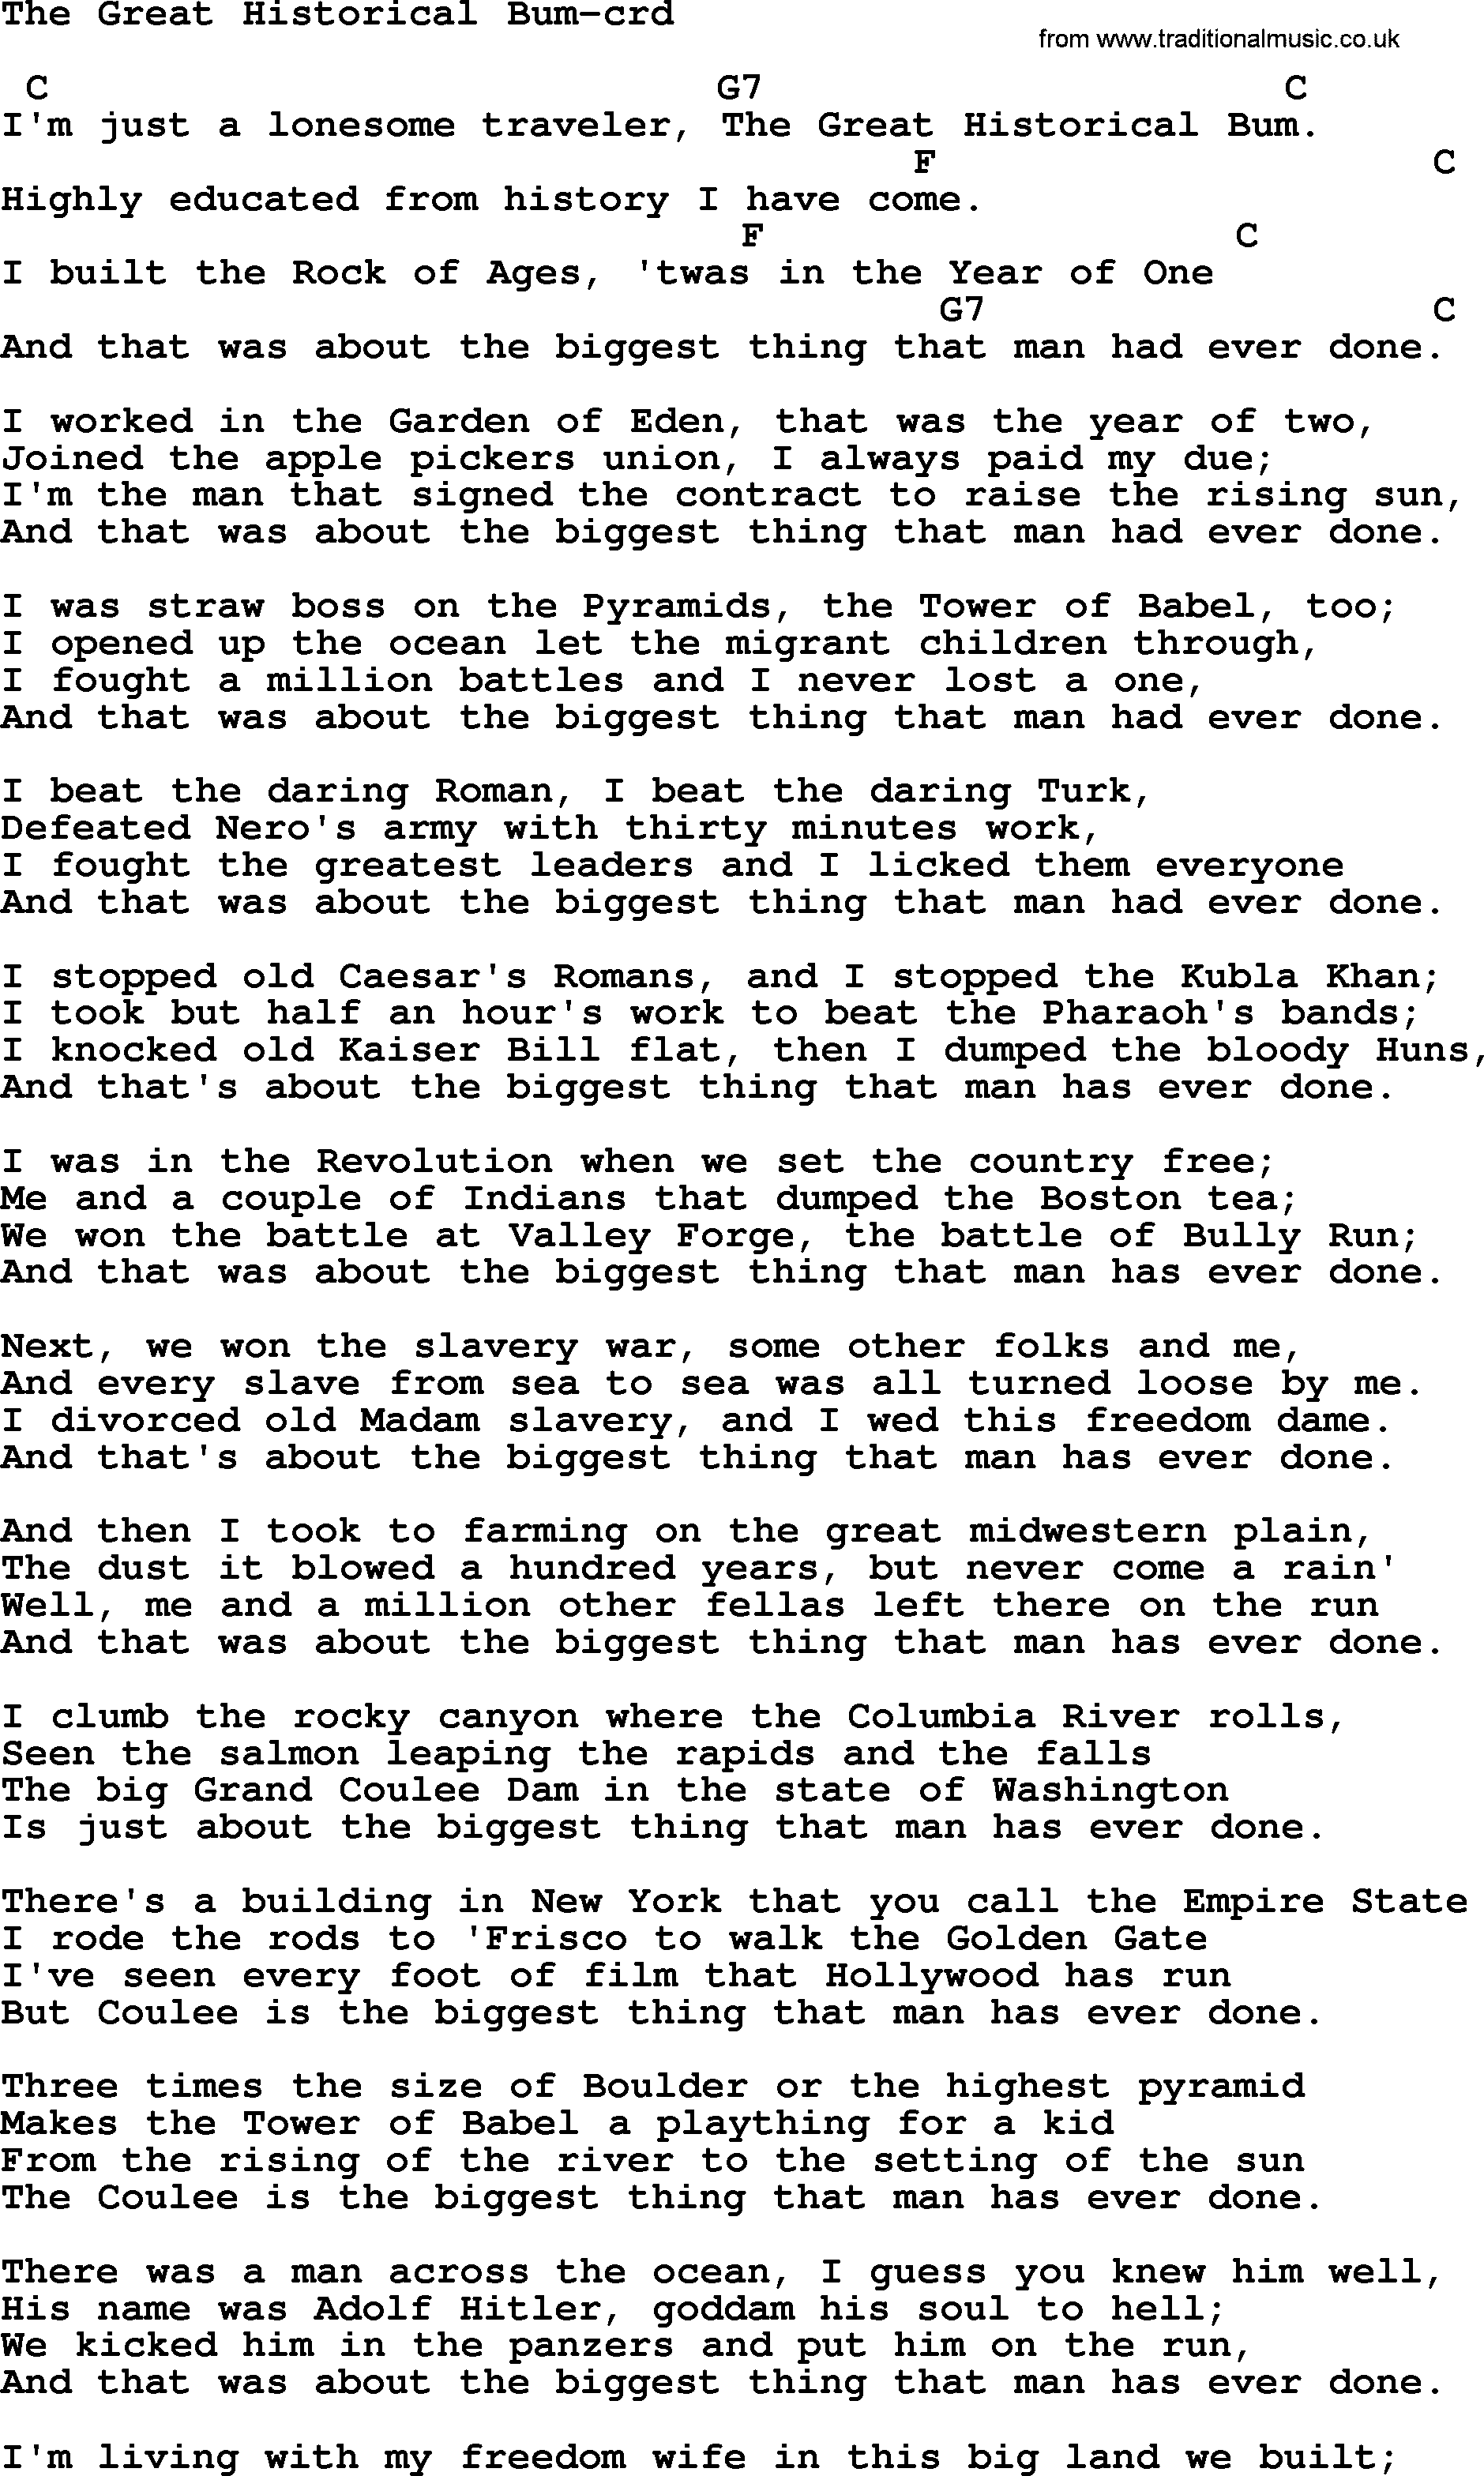 Woody Guthrie song The Great Historical Bum lyrics and chords